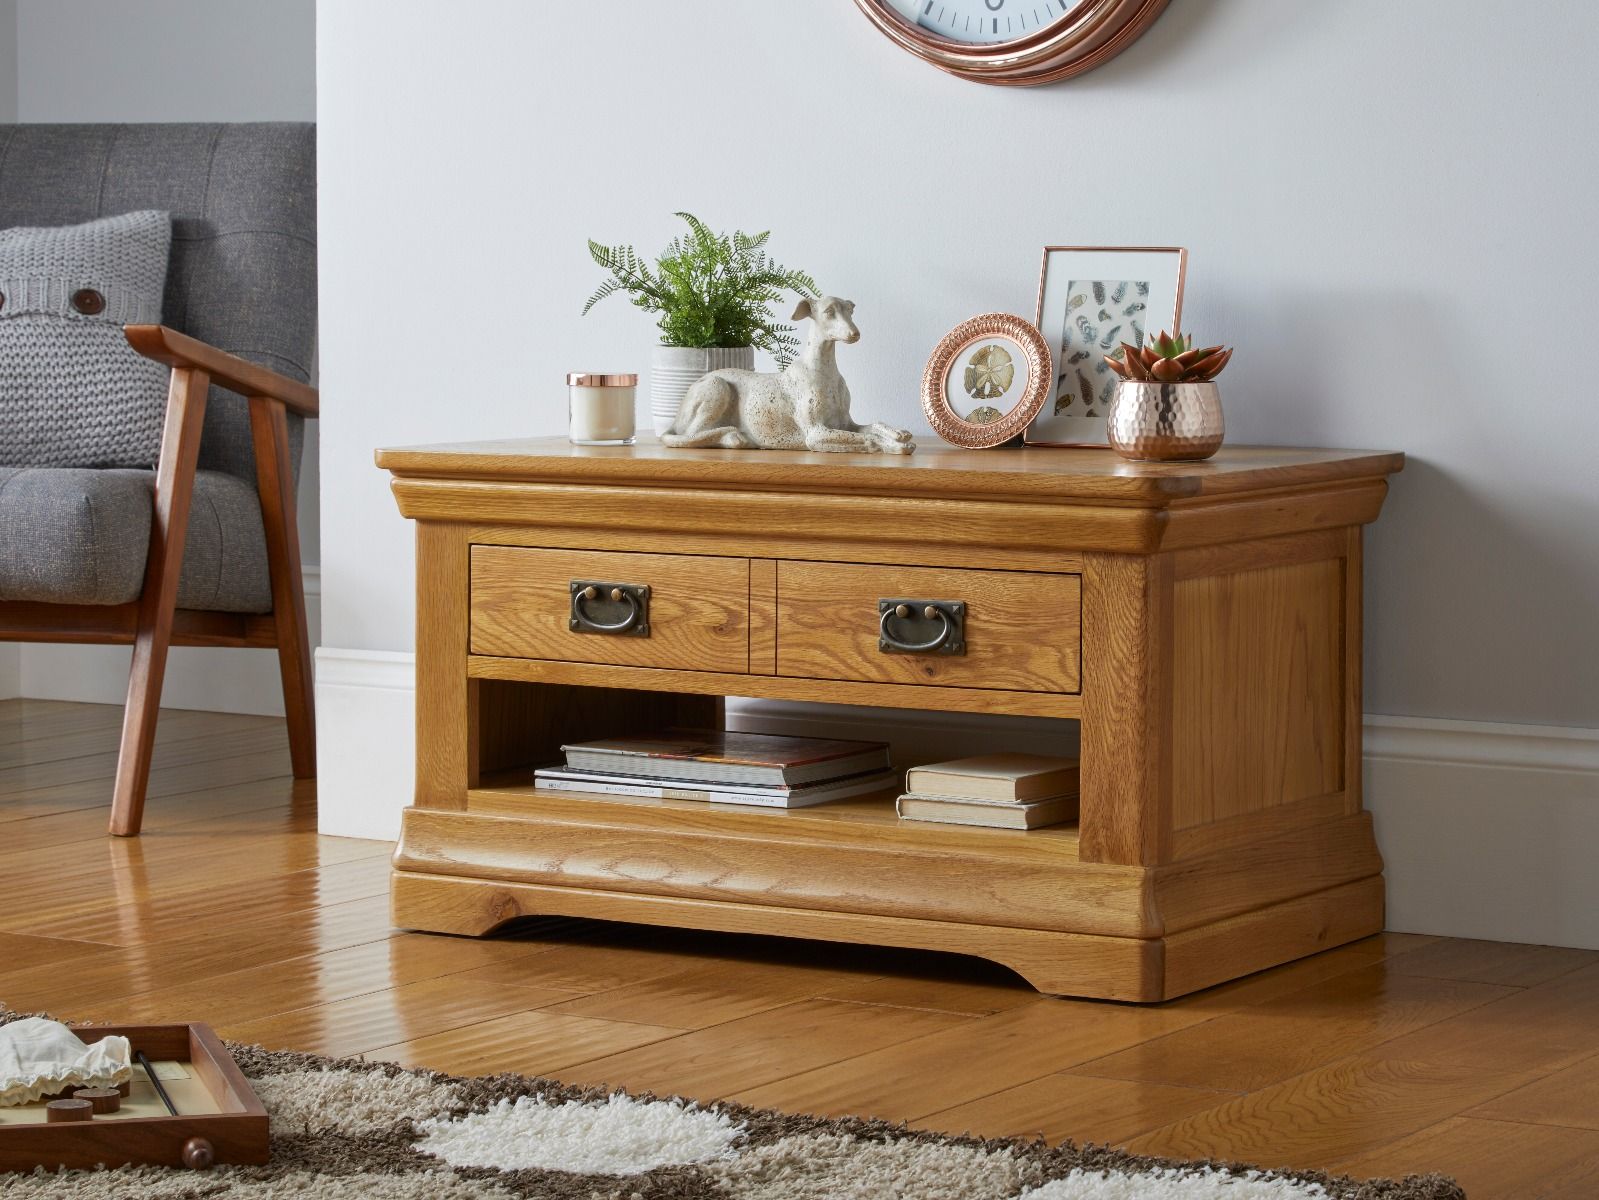 Farmhouse Oak Coffee Table with Drawer and Shelf - 10% OFF CODE SAVE